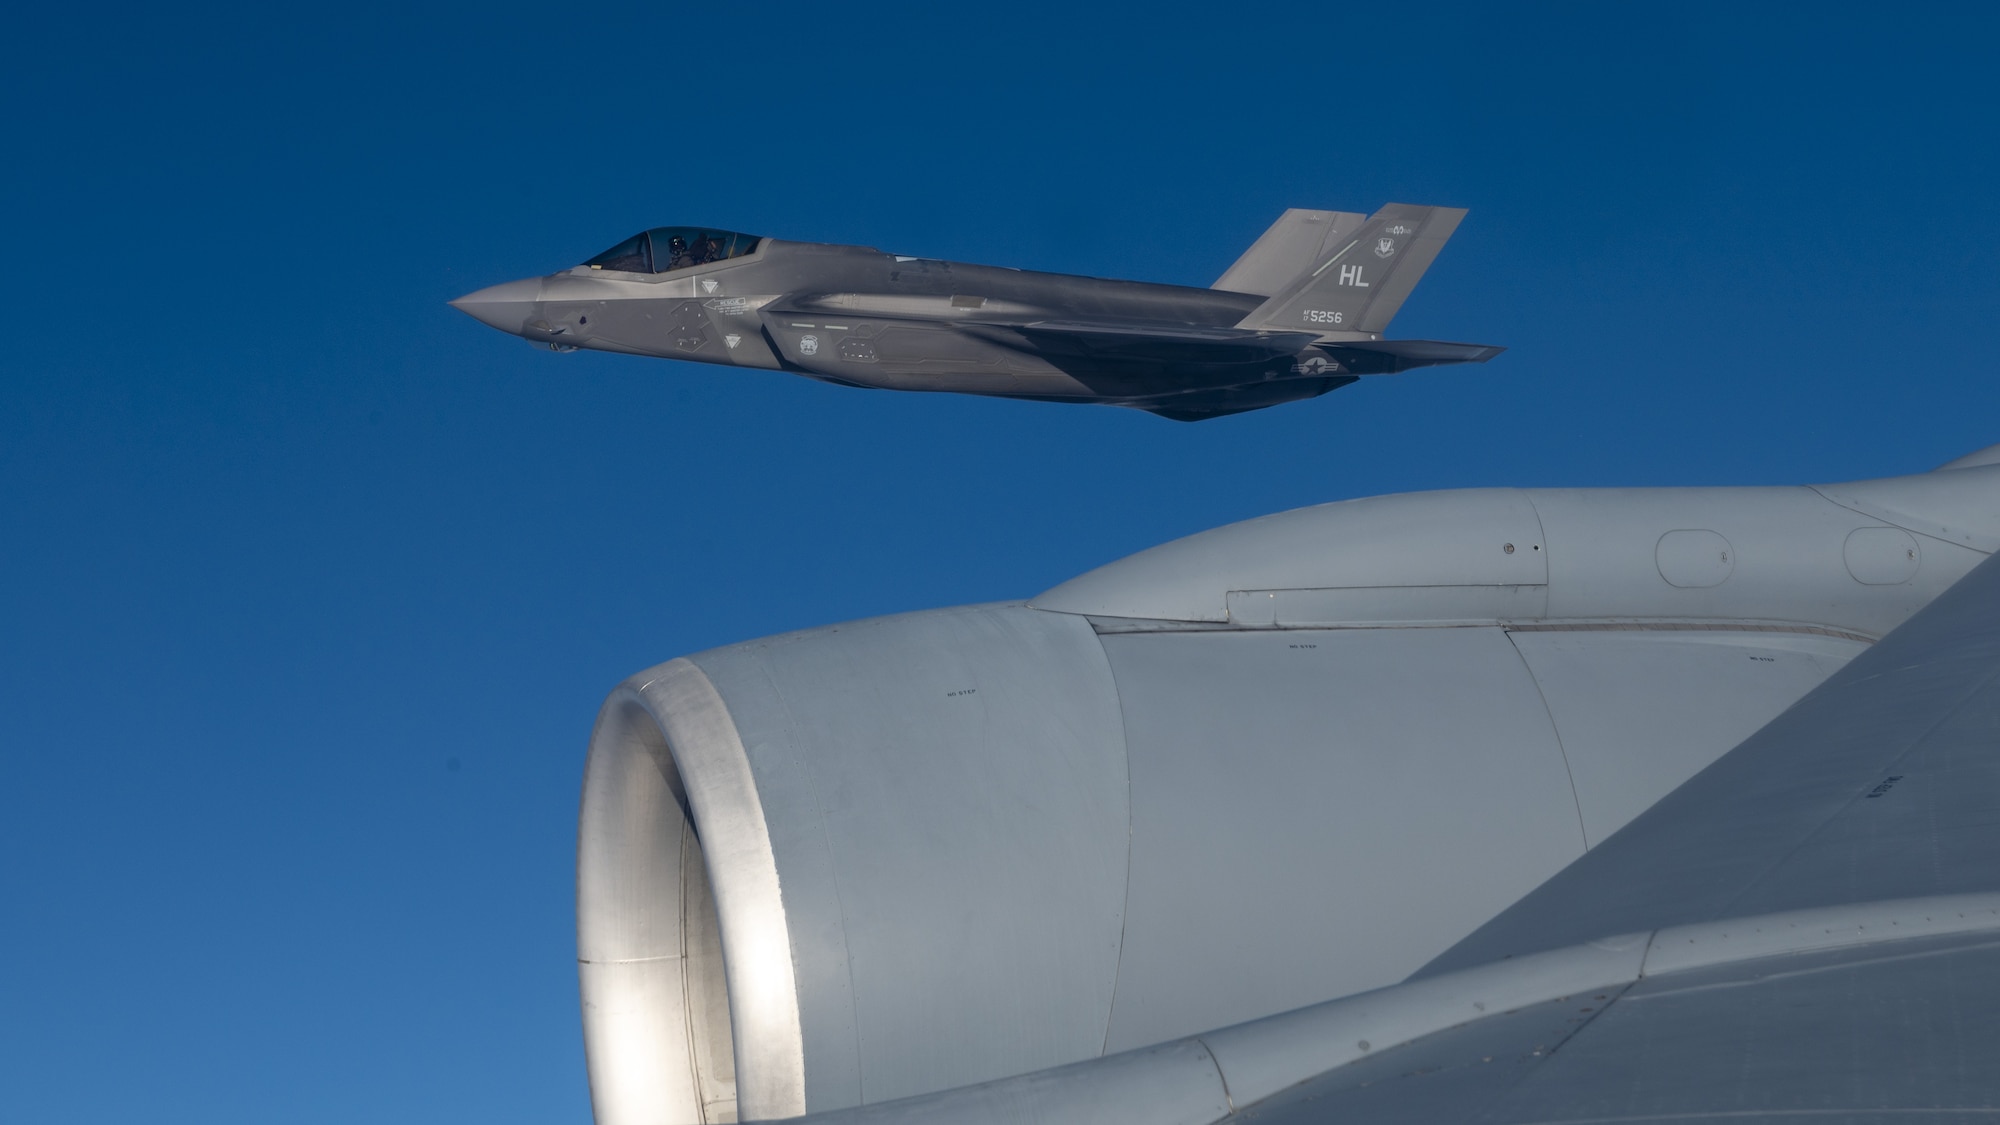 A U.S. Air Force F-35 Lightning II from Hill Air Force Base flies in formation with a KC-135 Stratotanker from Fairchild Air Force Base during a routine air refueling mission Dec. 12, 2022. The F-35 pilots and KC-135 crew conducted the training to enhance their readiness to execute missions anywhere, anytime. (U.S. Air Force photo by Staff Sgt. Lawrence Sena)